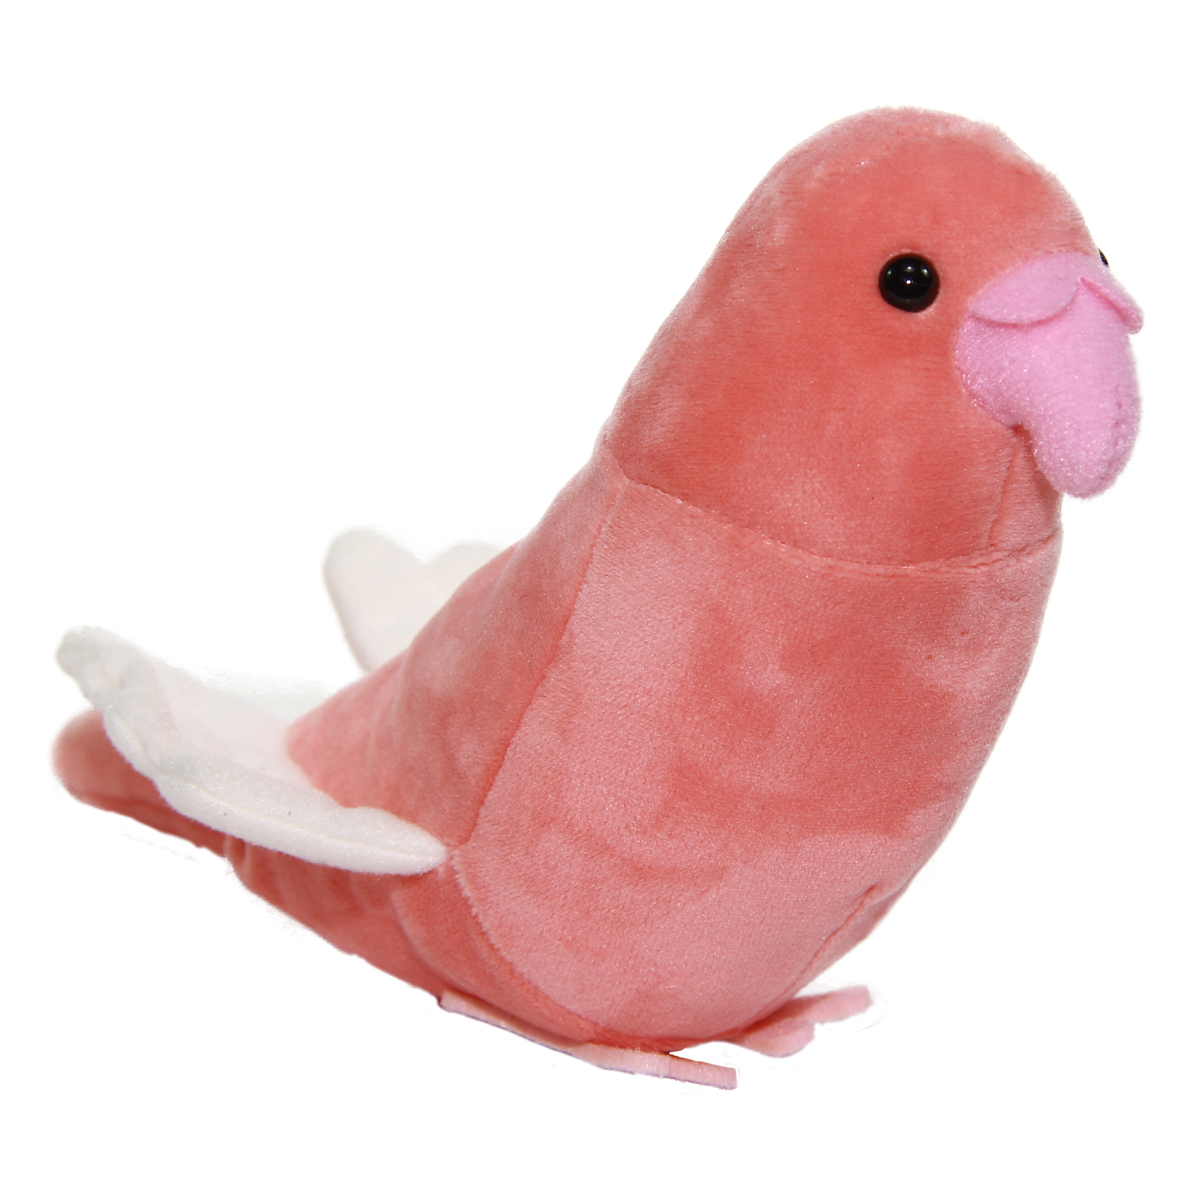 Pink Parakeet Plush Doll, Cute Birds Collection, Stuffed Animal Toy, Pink, 6 Inches